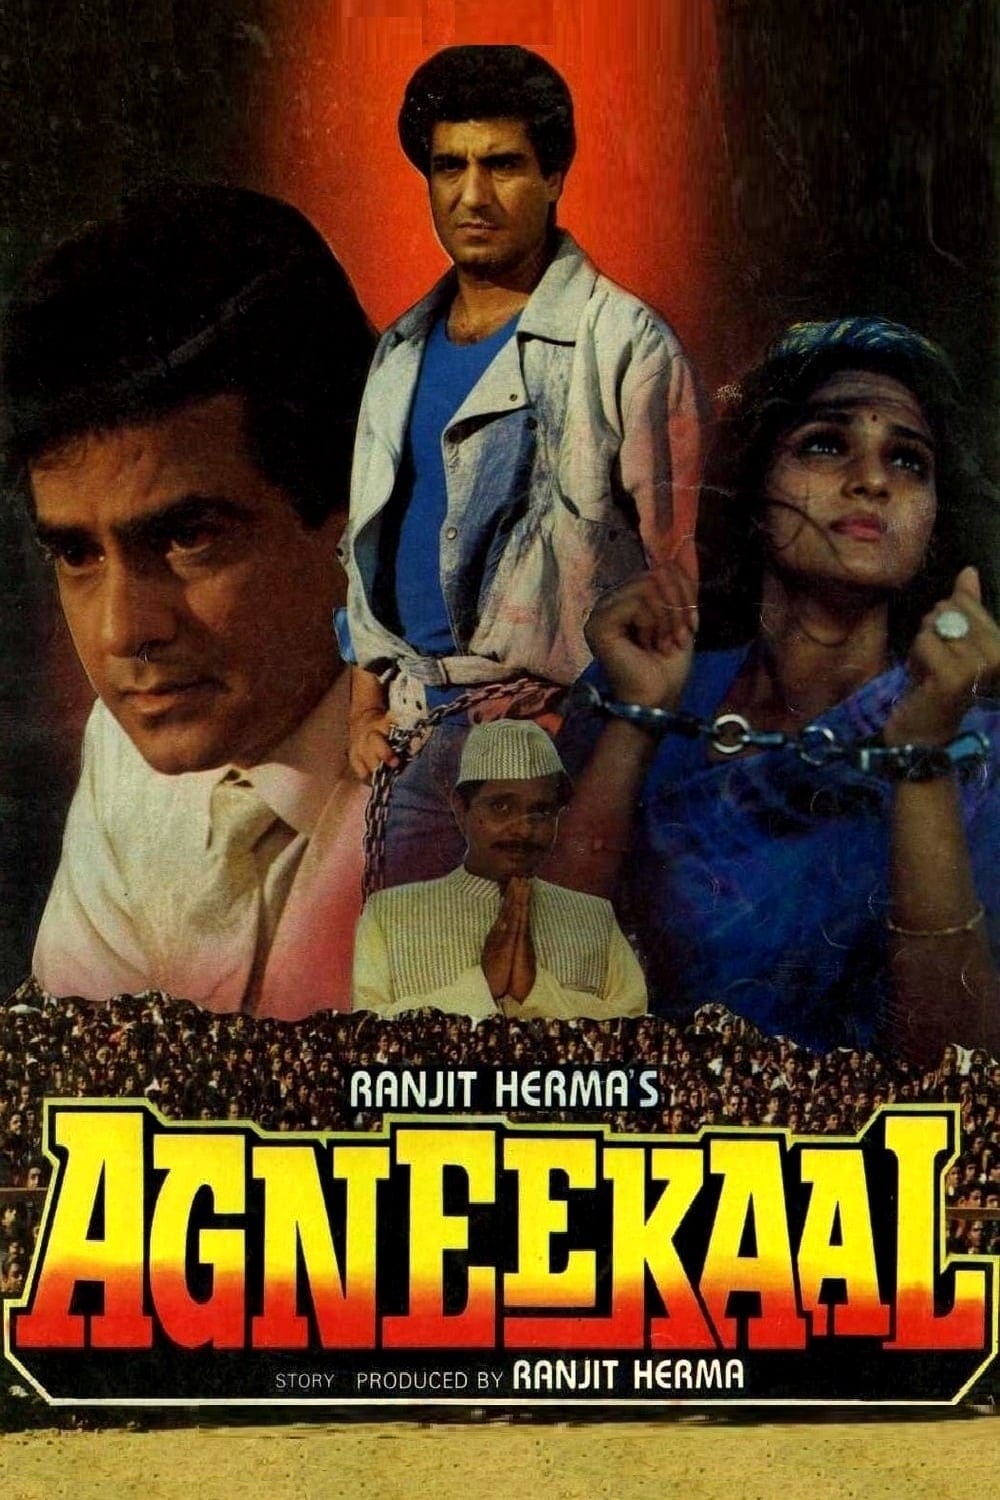 Poster for the movie "Agneekaal"